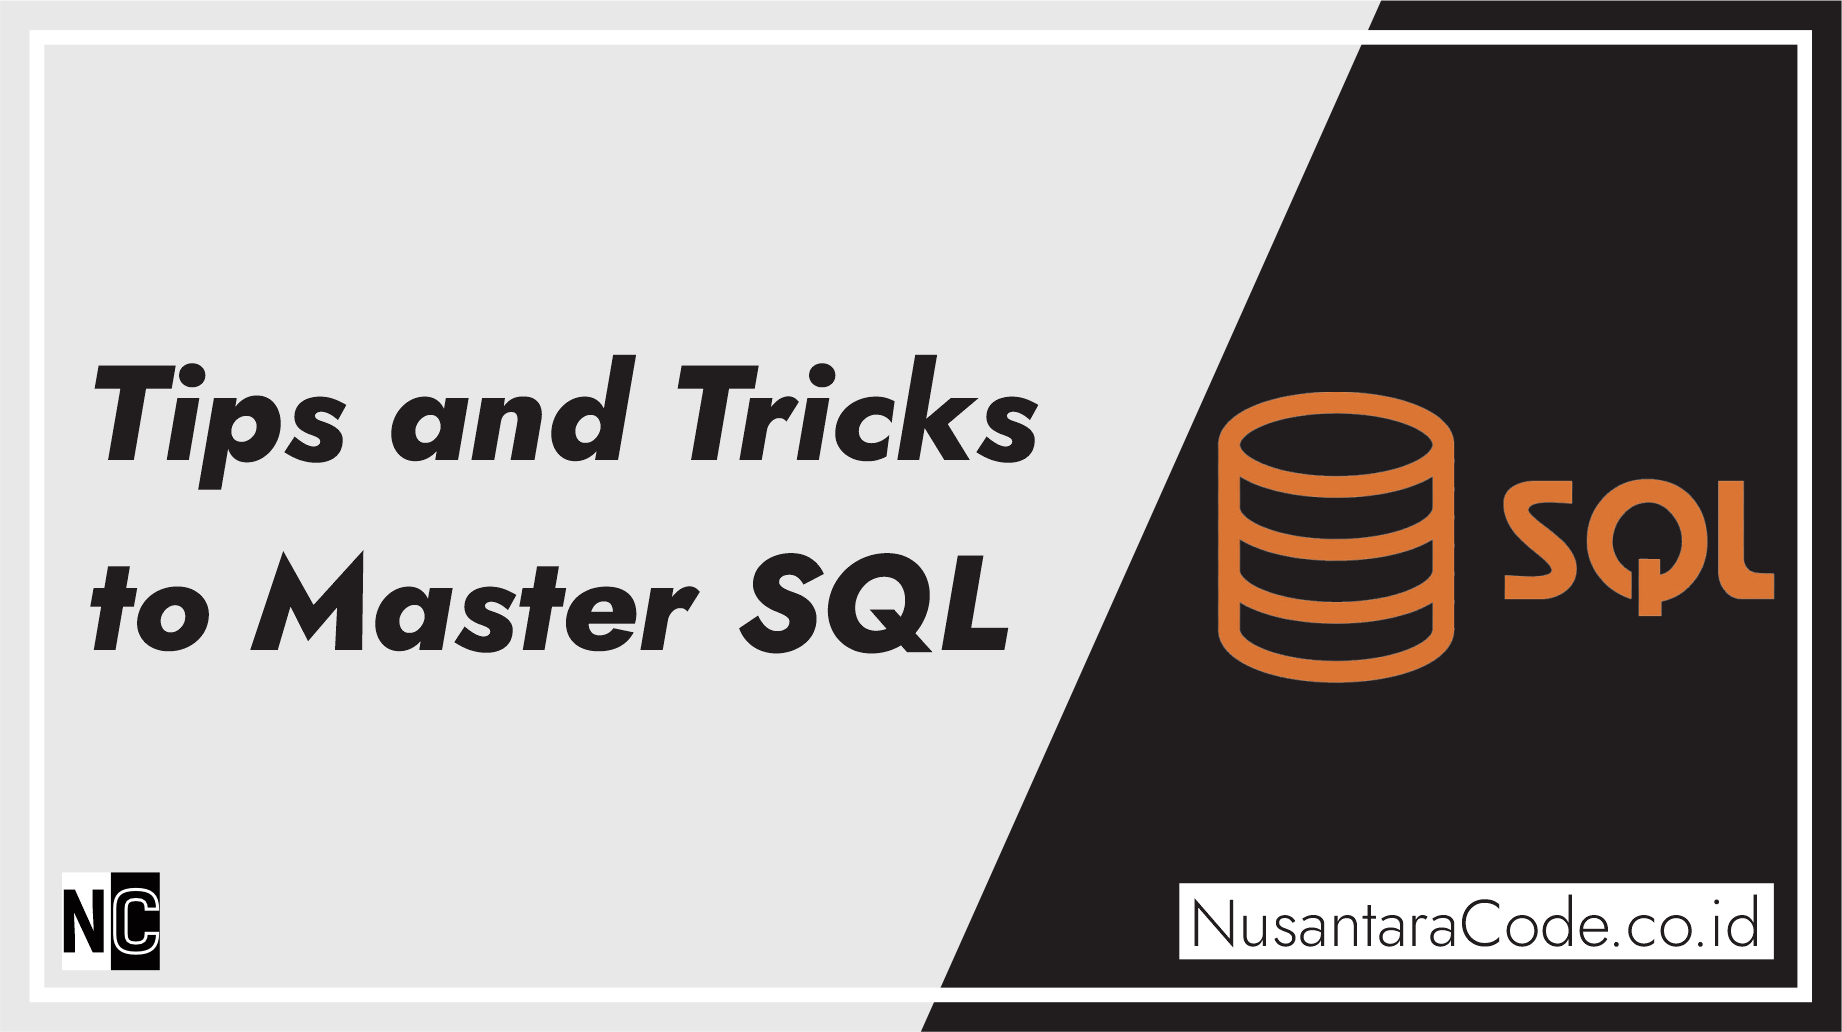 Tips and Tricks to Master SQL